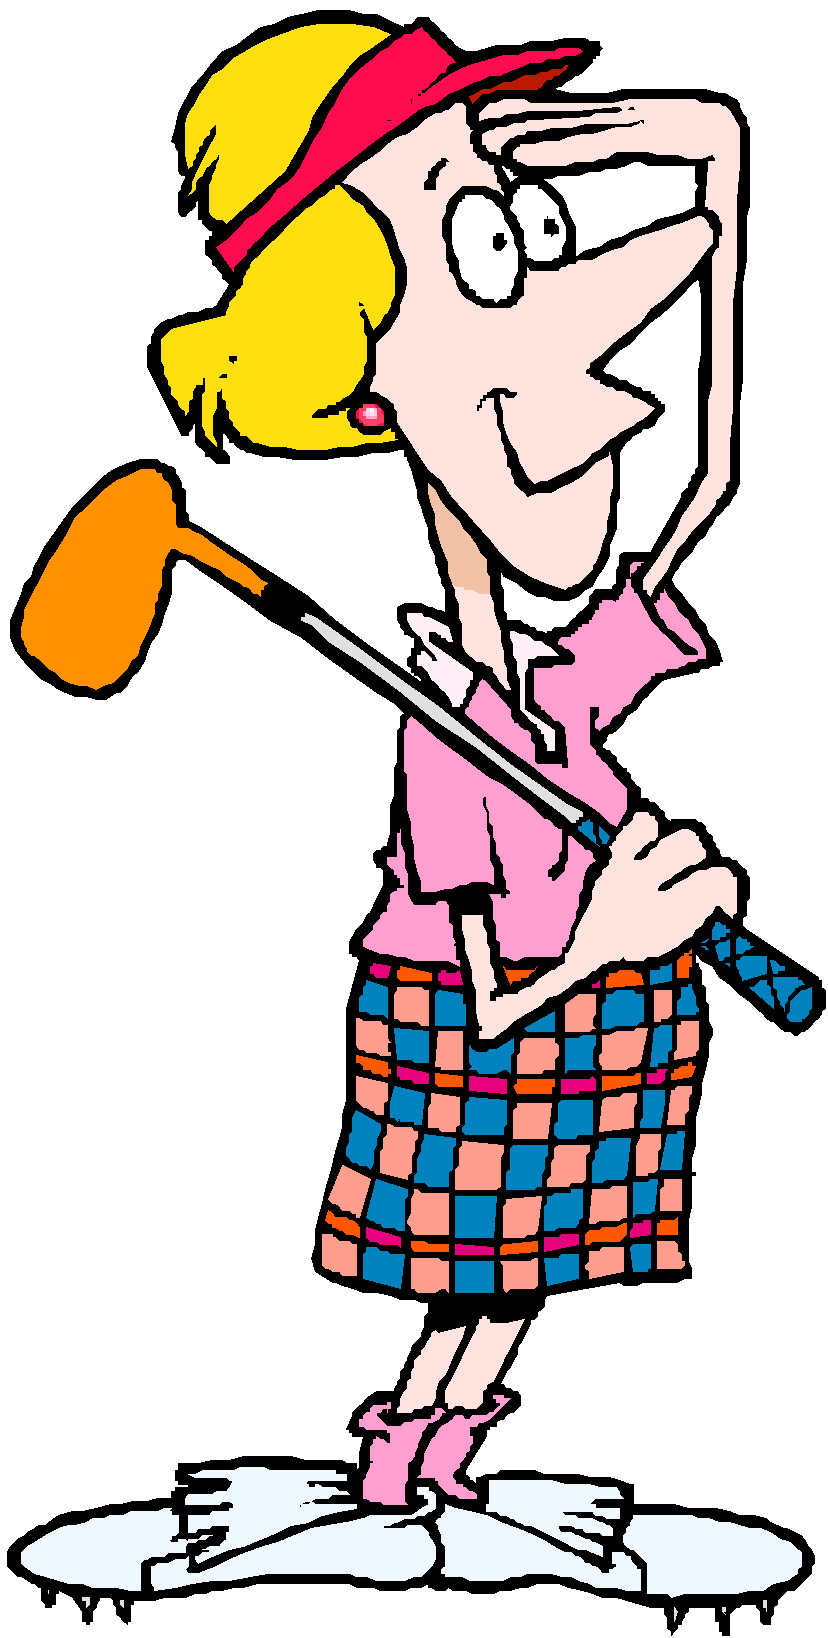 golfing clipart lady